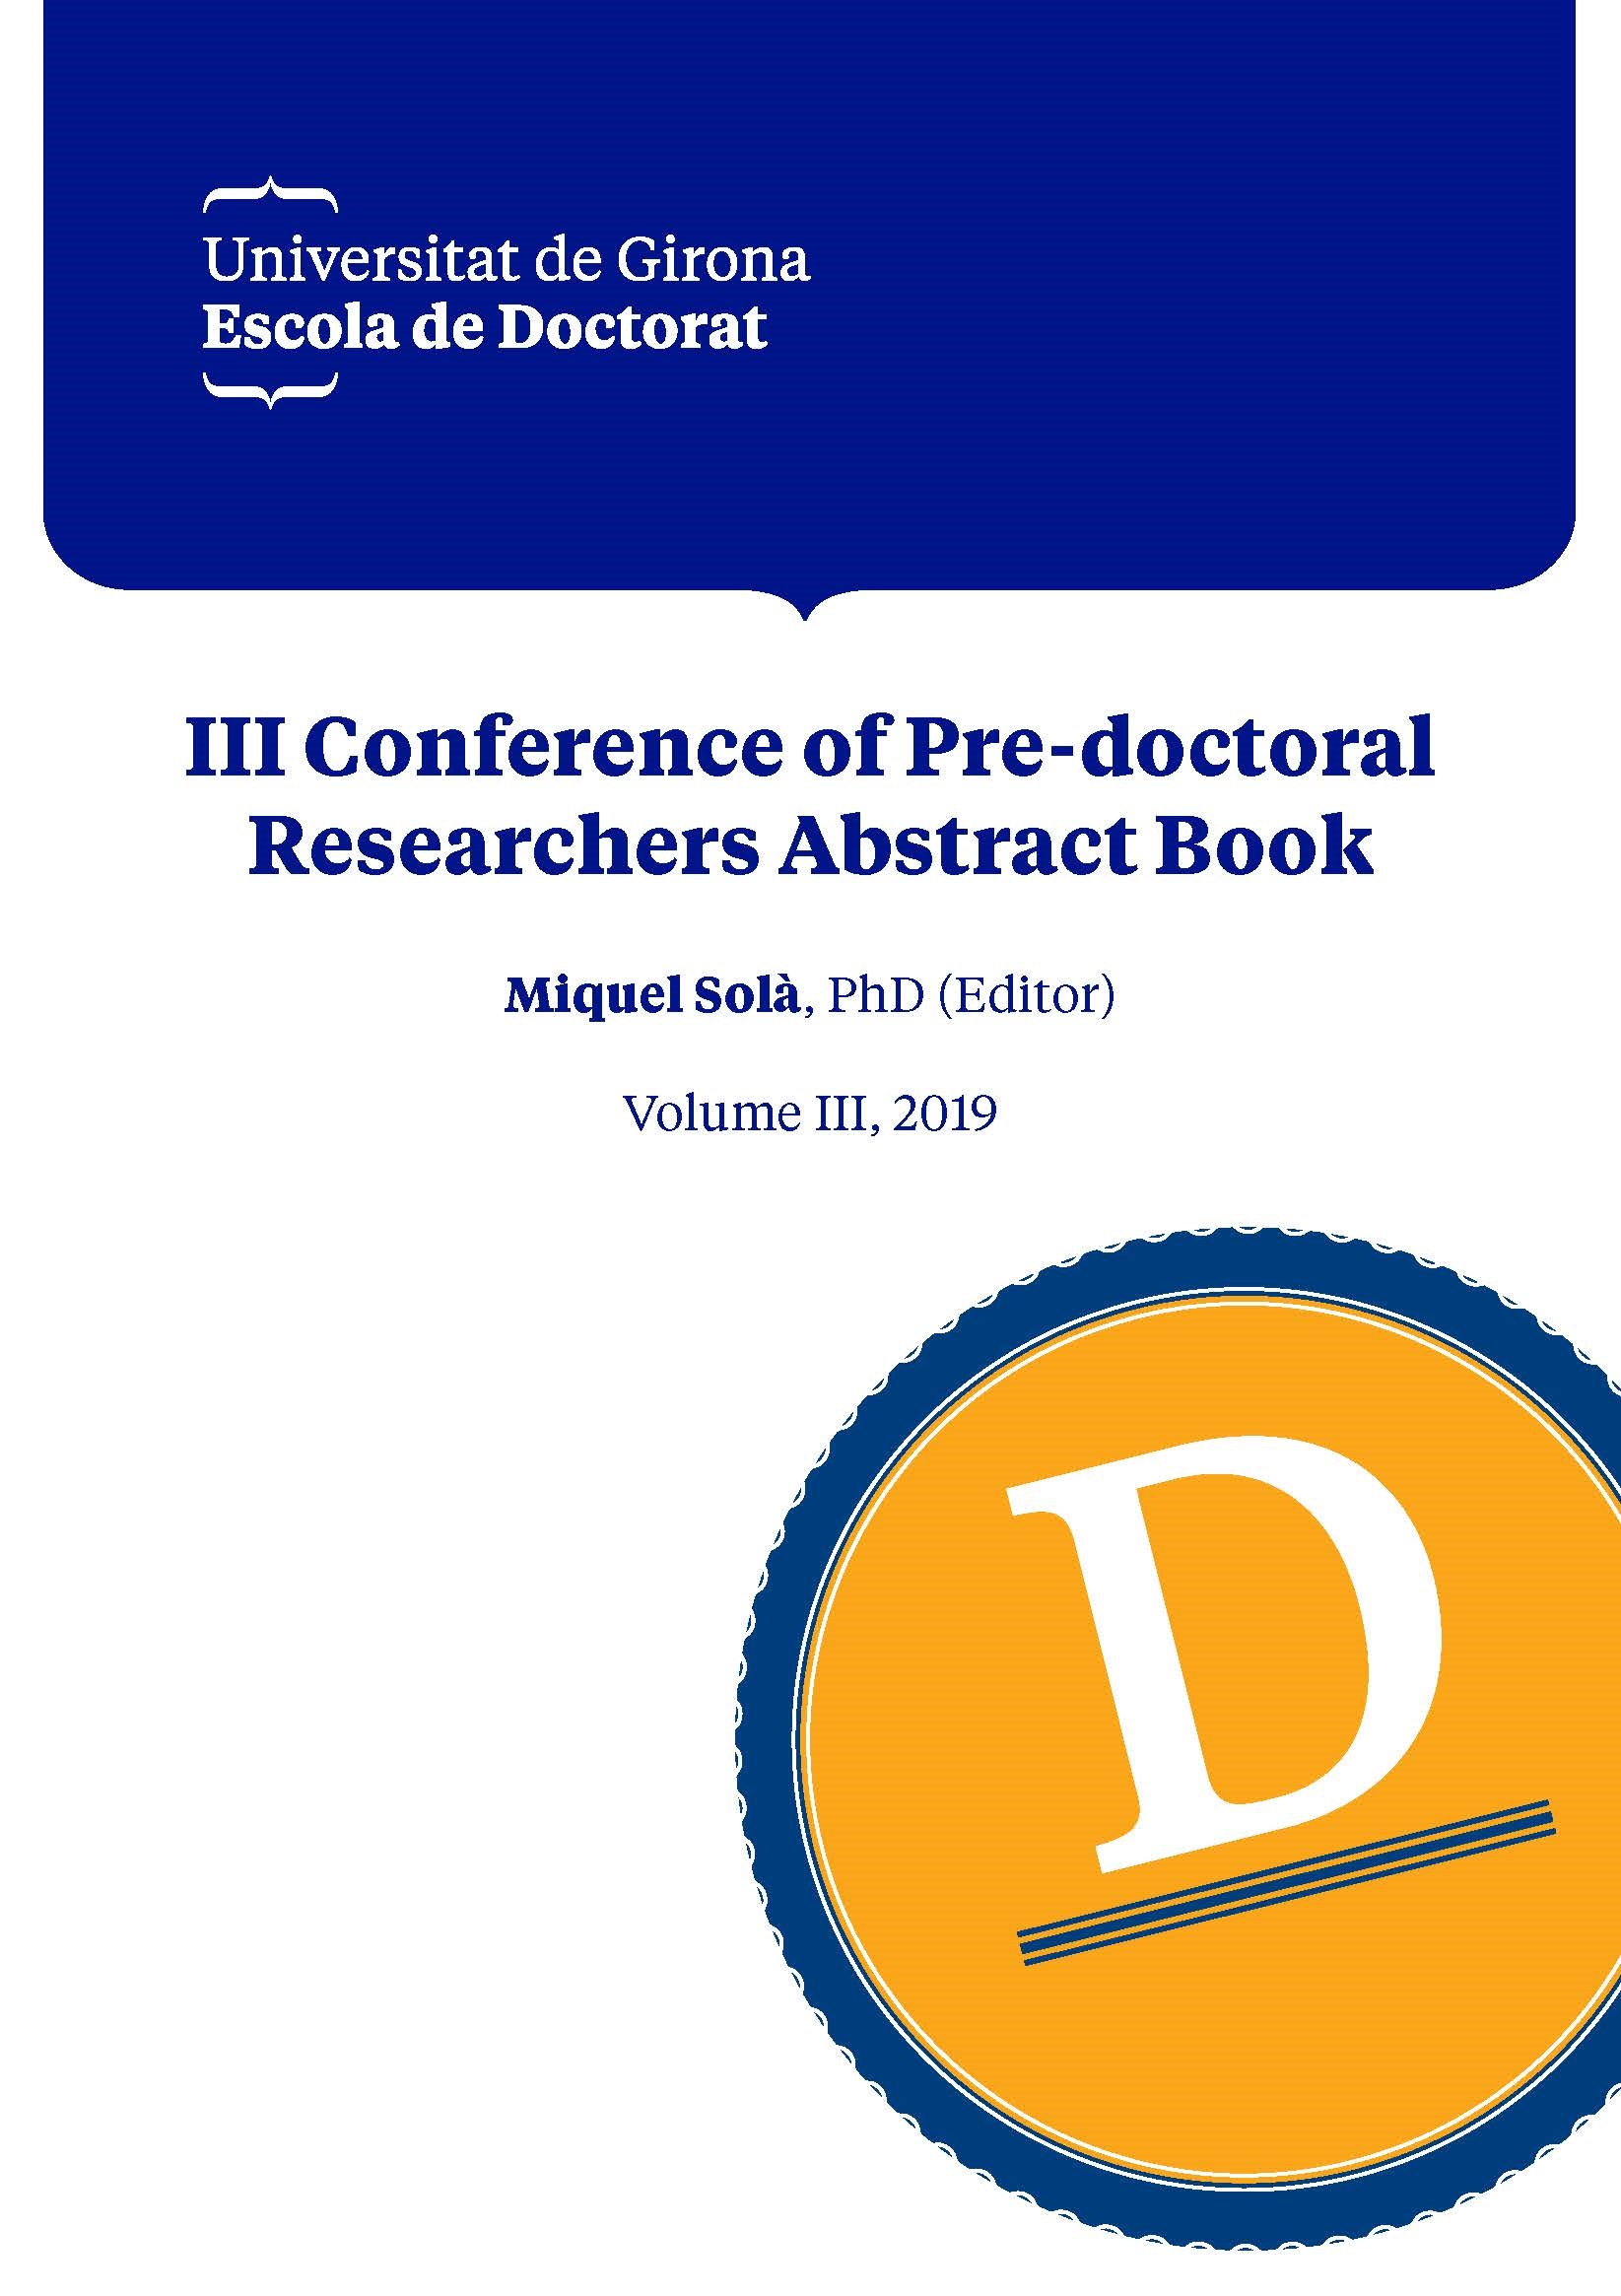 III Conference of Pre-doctoral Researchers Abstract Book